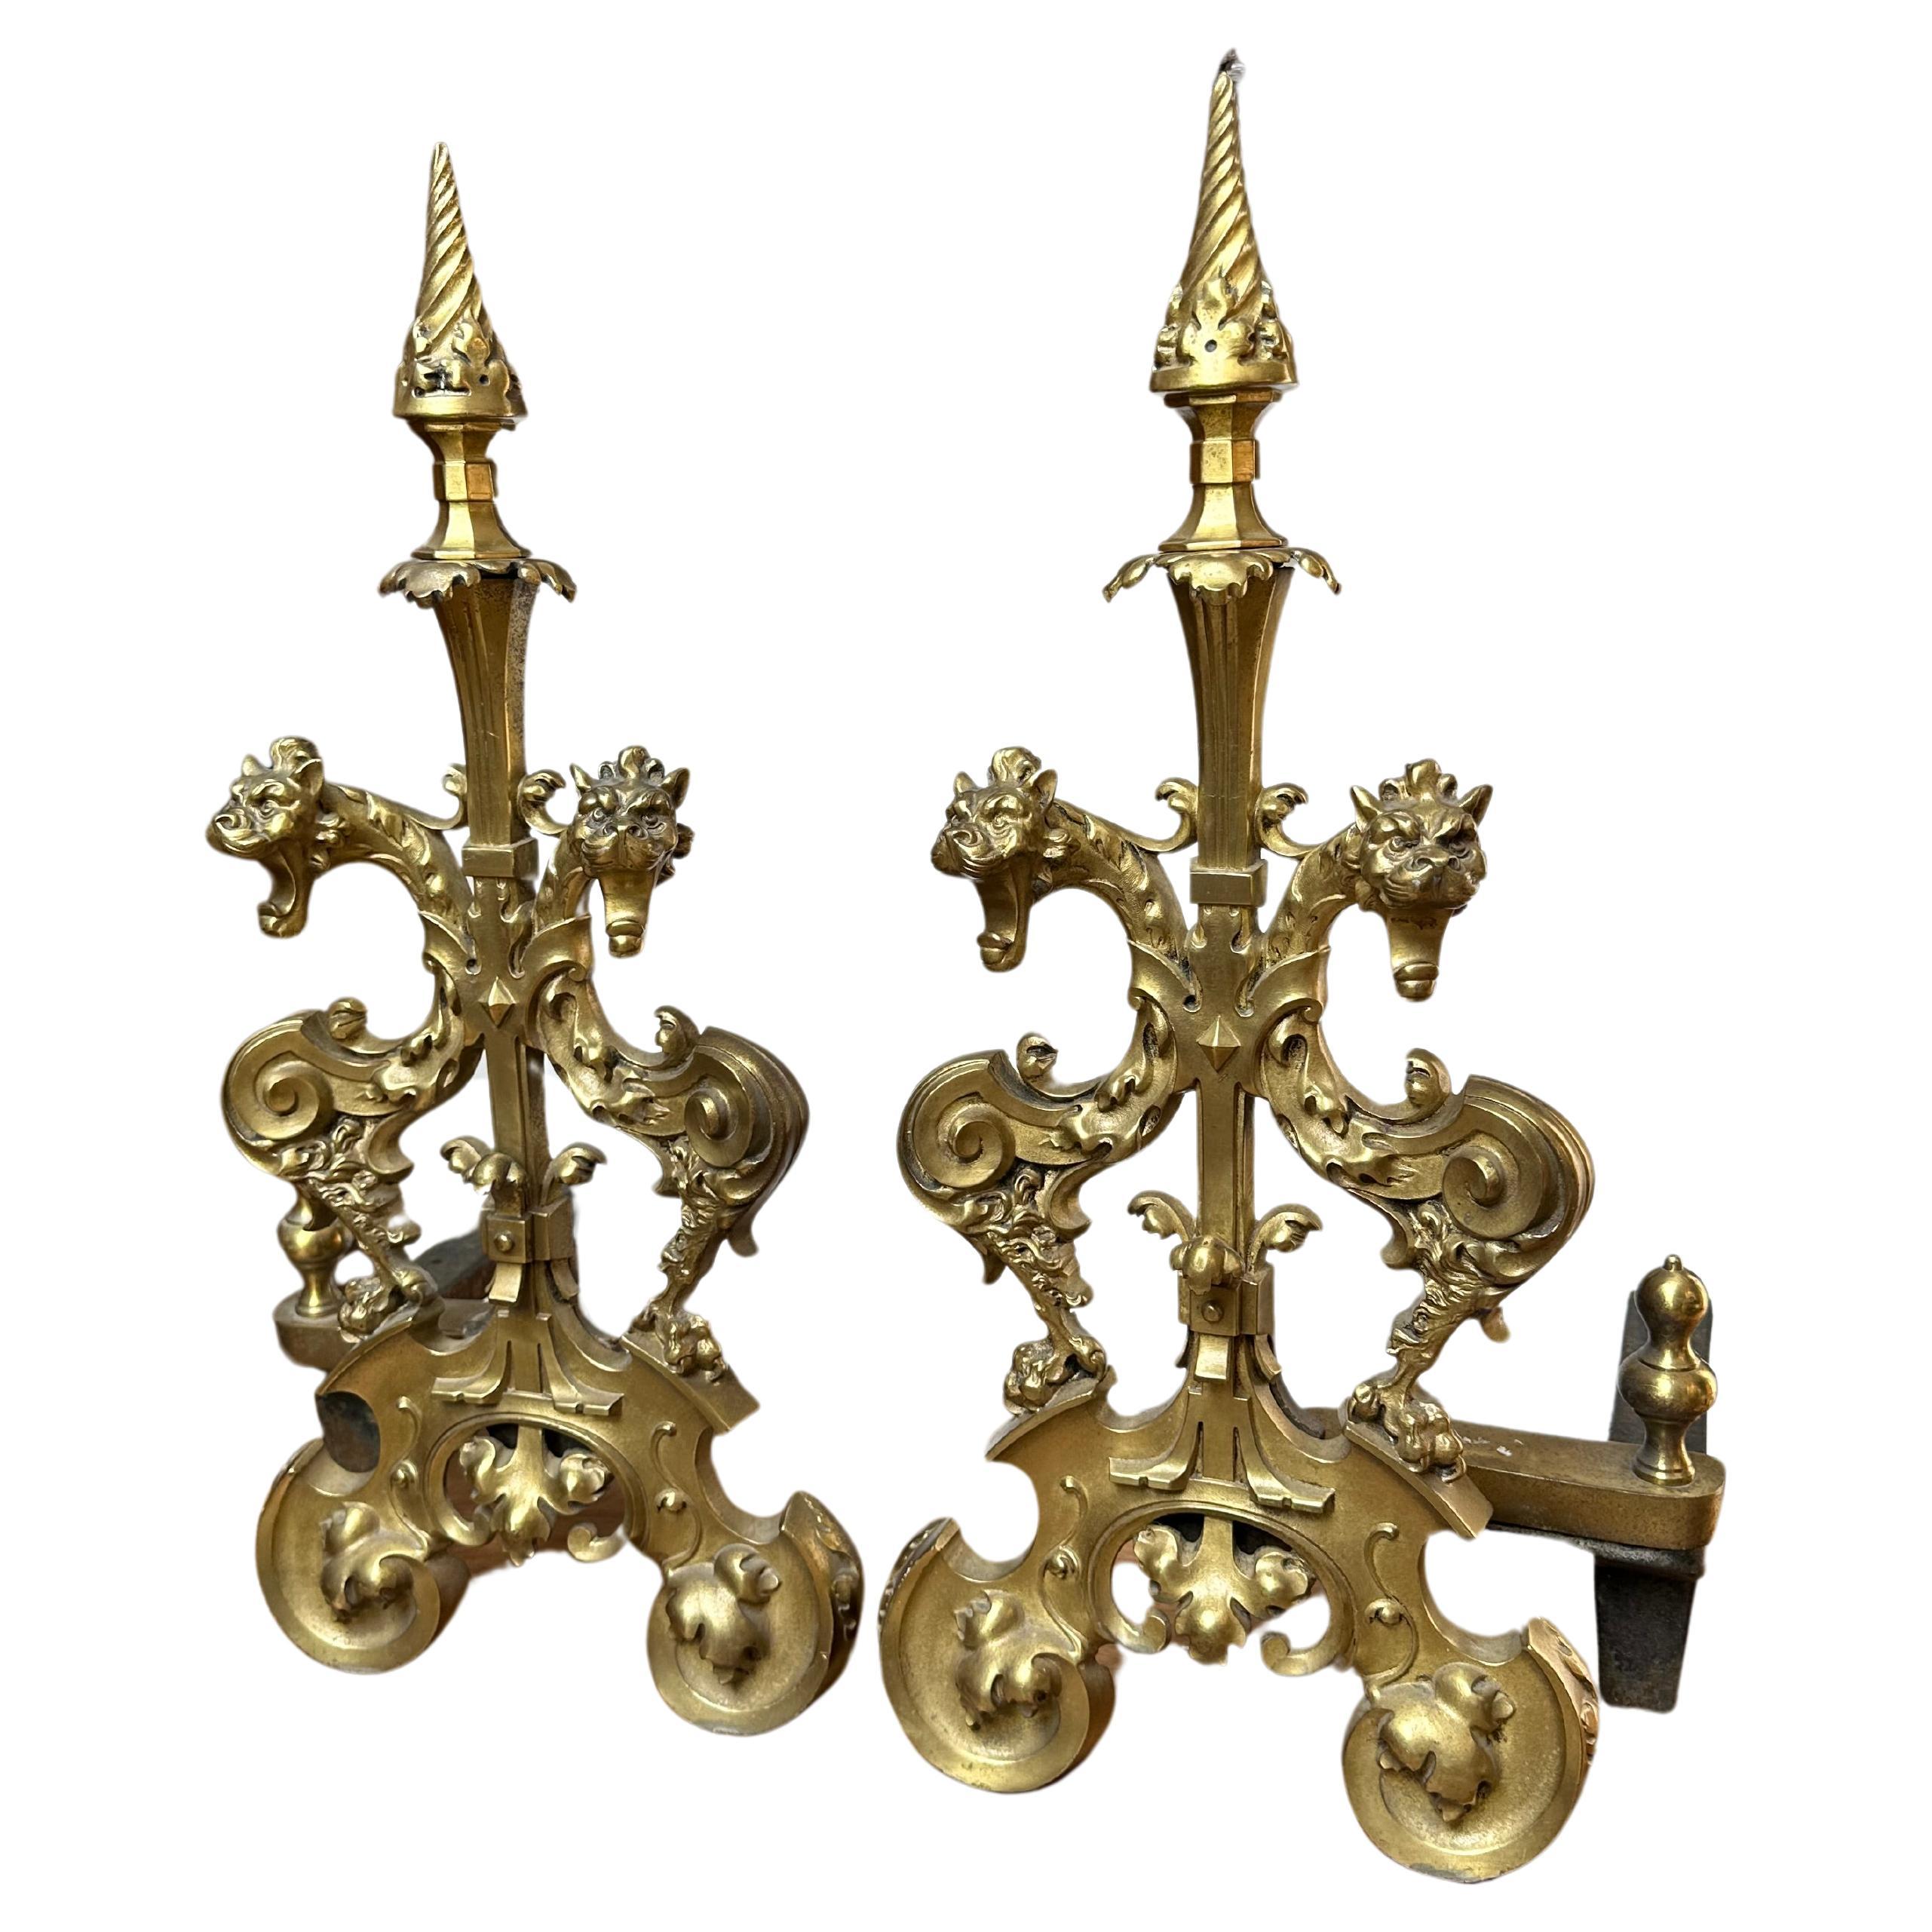 Antique Revive Gothic Bronze Gilt Dragon Andirons or Firedogs / Fireplace Tools en vente